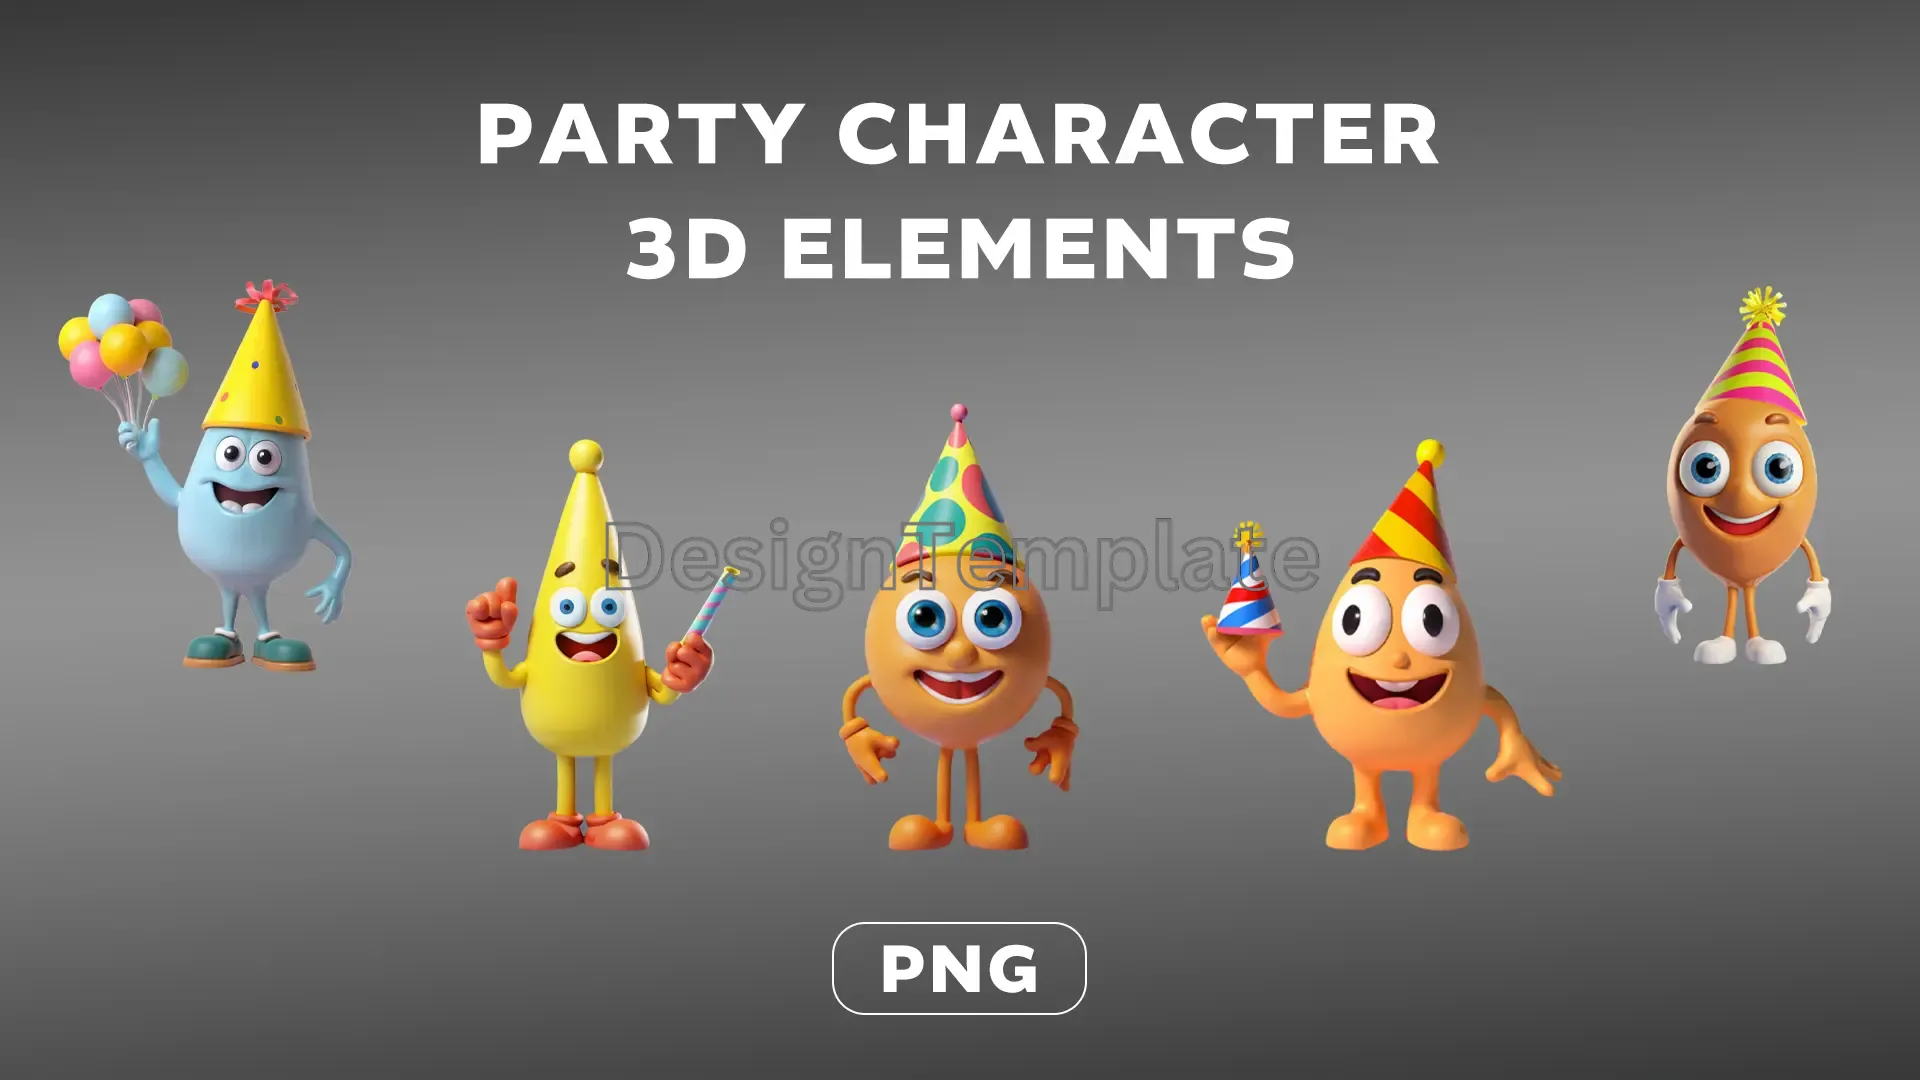 Festive Figures Party Character 3D Elements Collection image